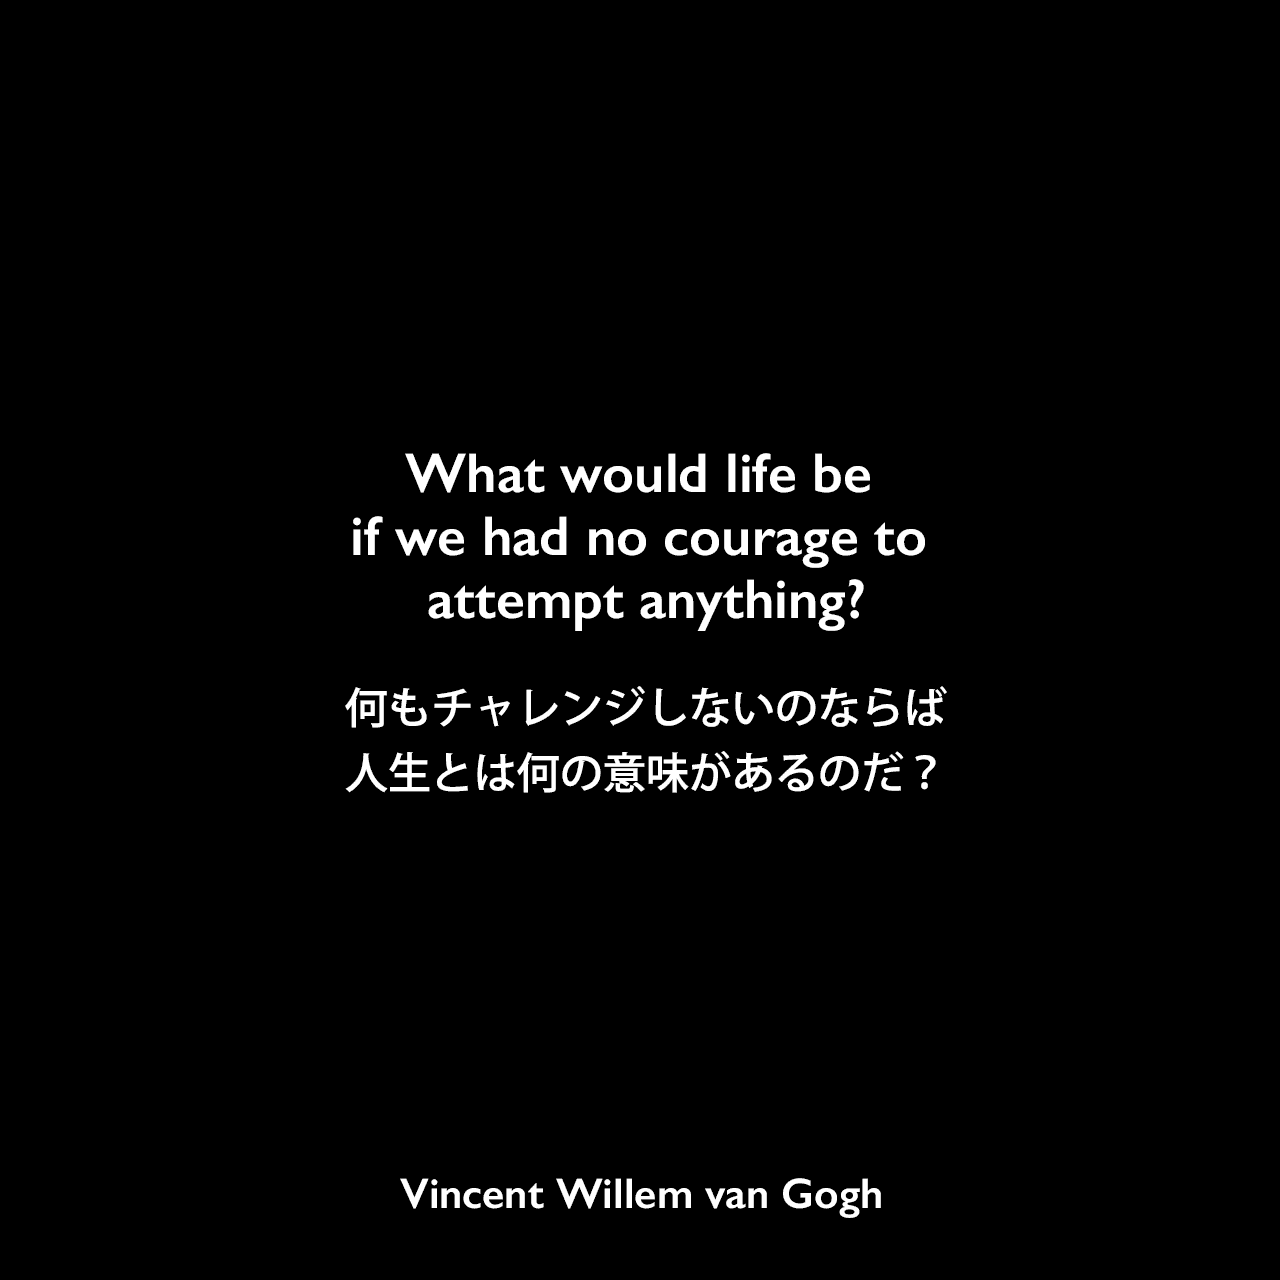 What would life be if we had no courage to attempt anything?何もチャレンジしないのならば人生とは何の意味があるのだ？- ゴッホの弟テオへ宛てた手紙よりVincent Willem van Gogh